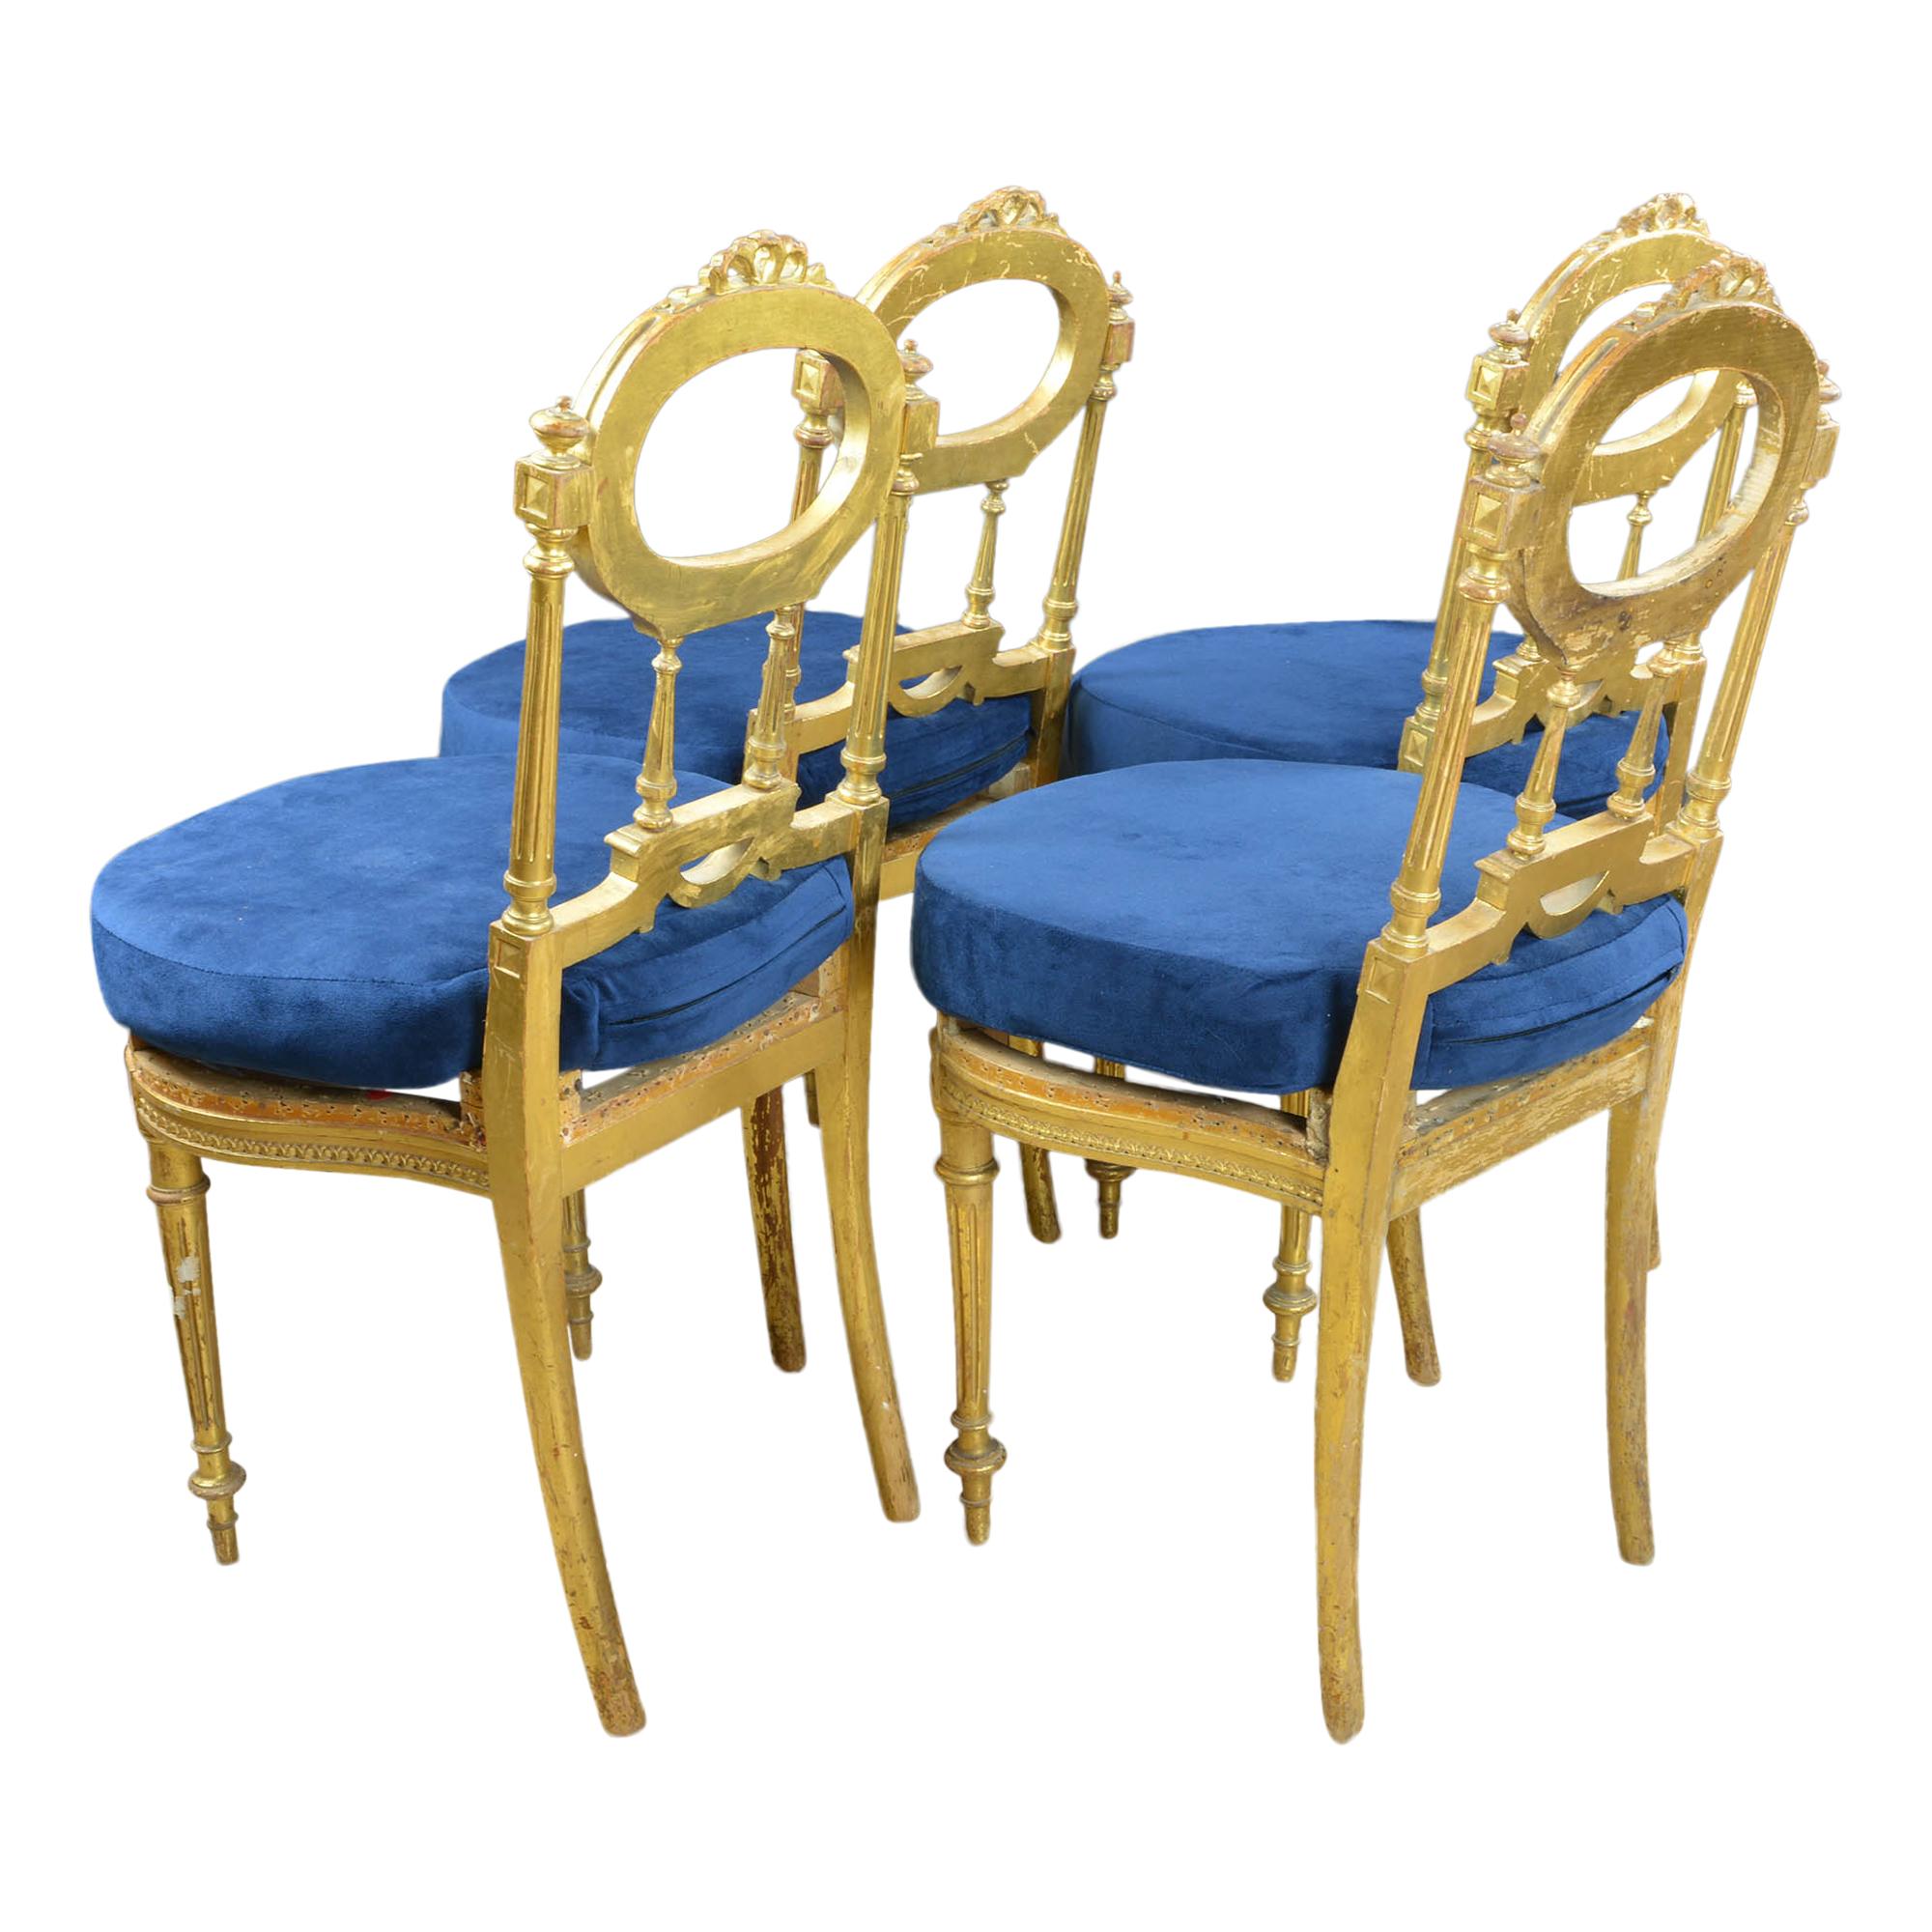 French Antique Giltwood Chairs with Blue Velvet Cushions Set of 4 For Sale